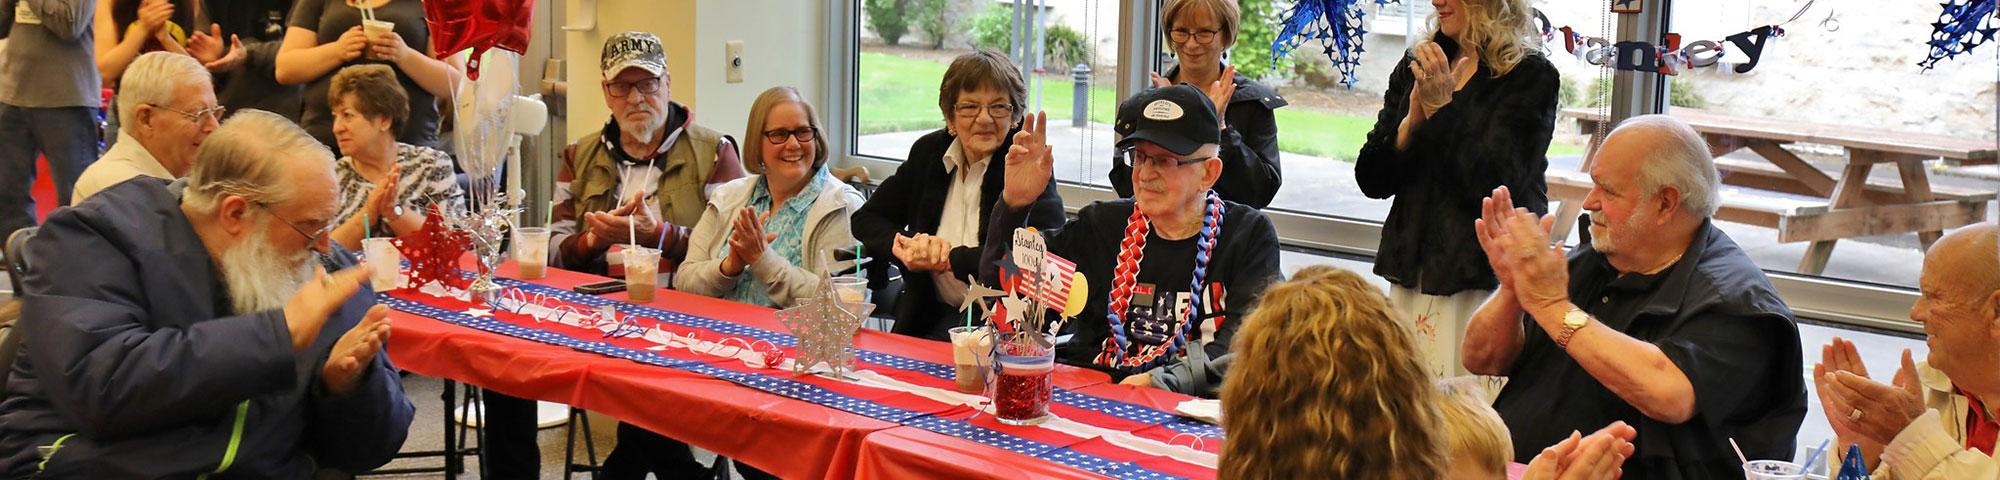 Stanley celebrates his 100th birthday - Port Orchard Veterans Home